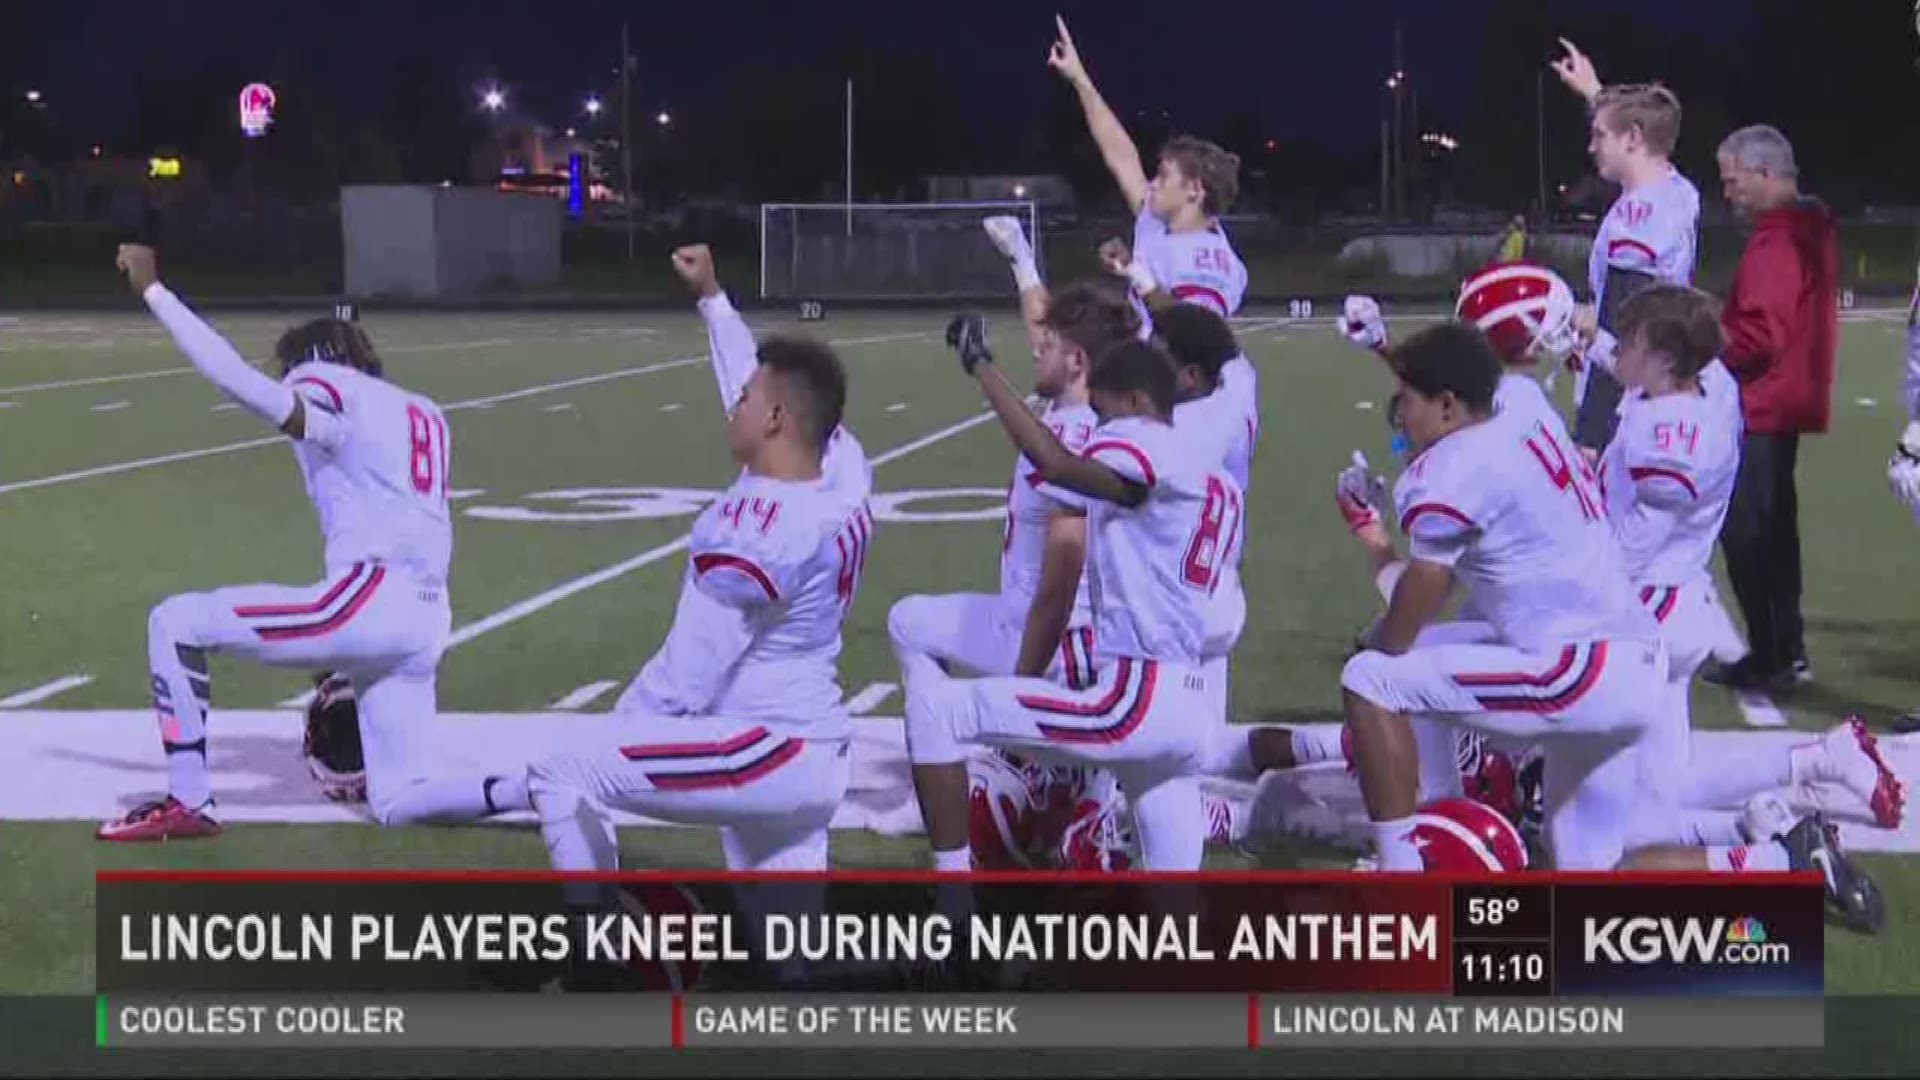 Lincoln players kneel during national anthem